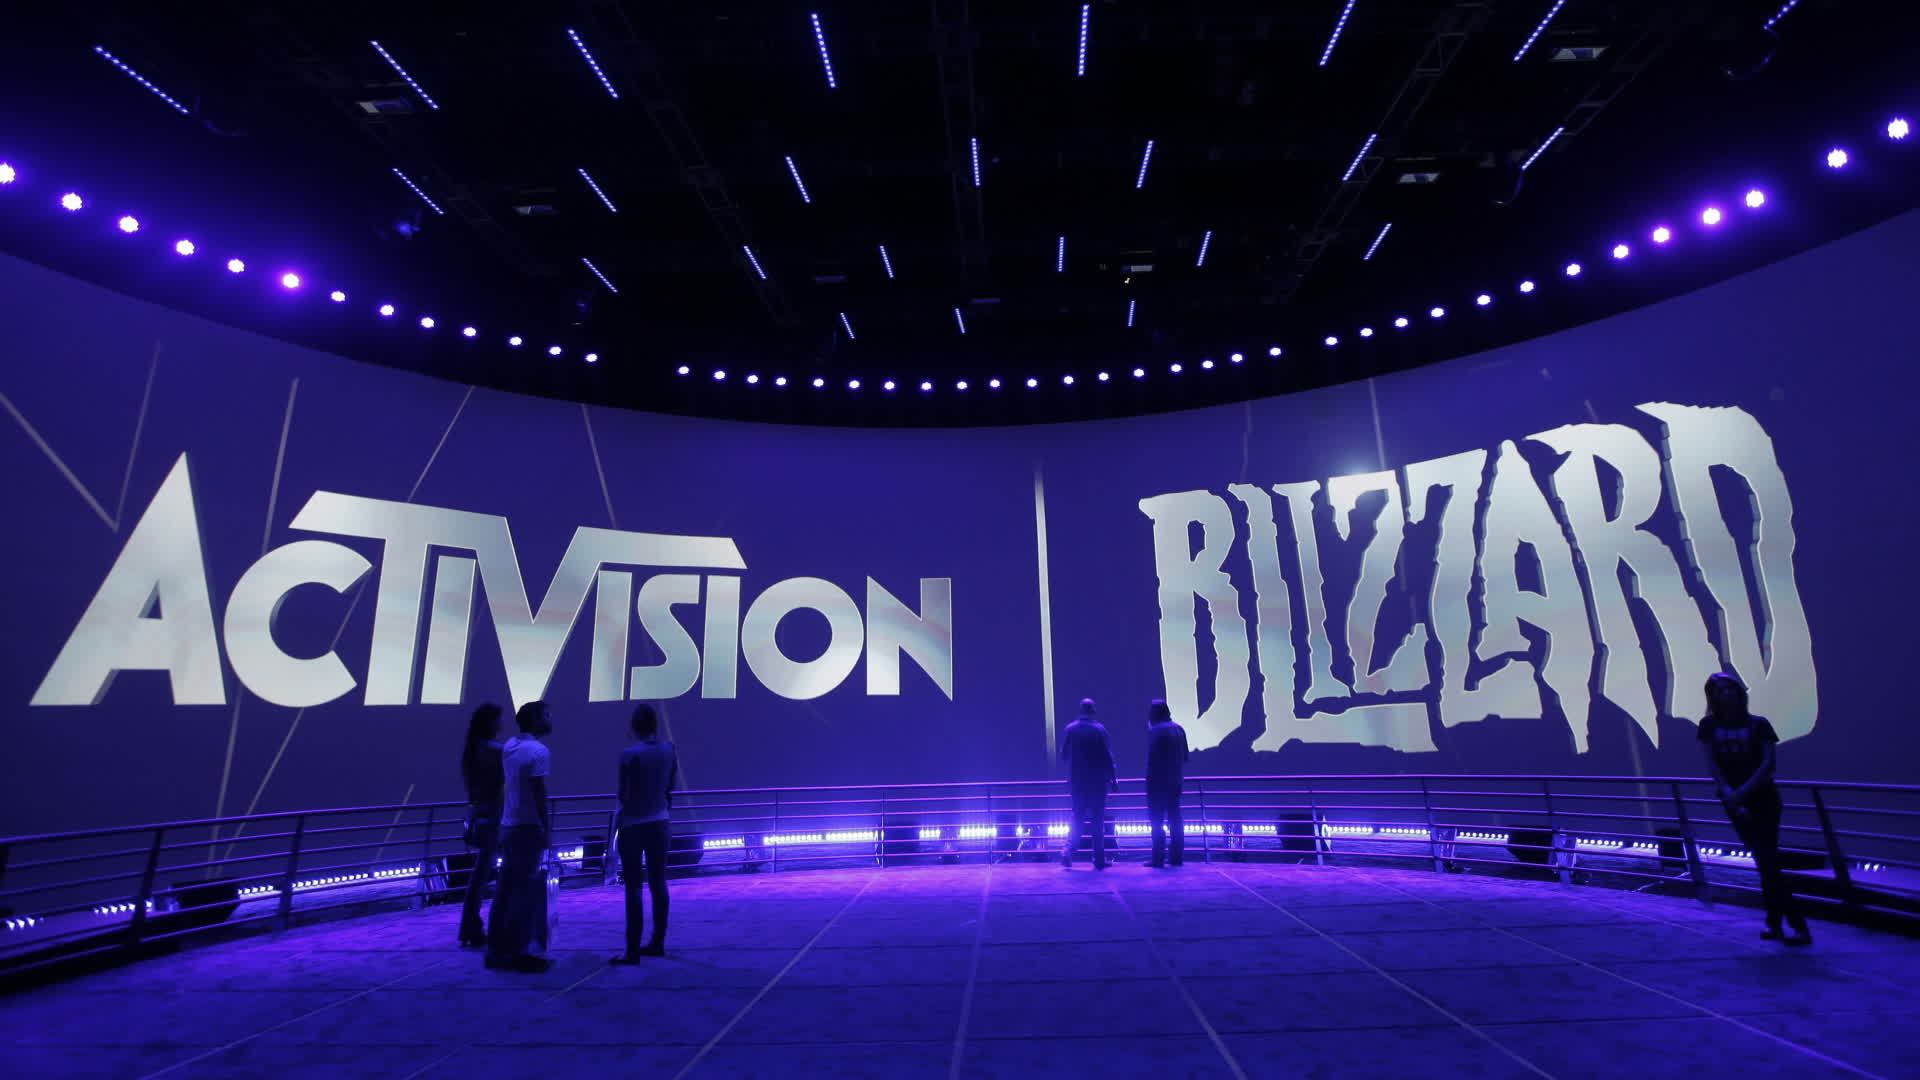 6 US treasurers demand answers from Activision Blizzard regarding harassment allegations